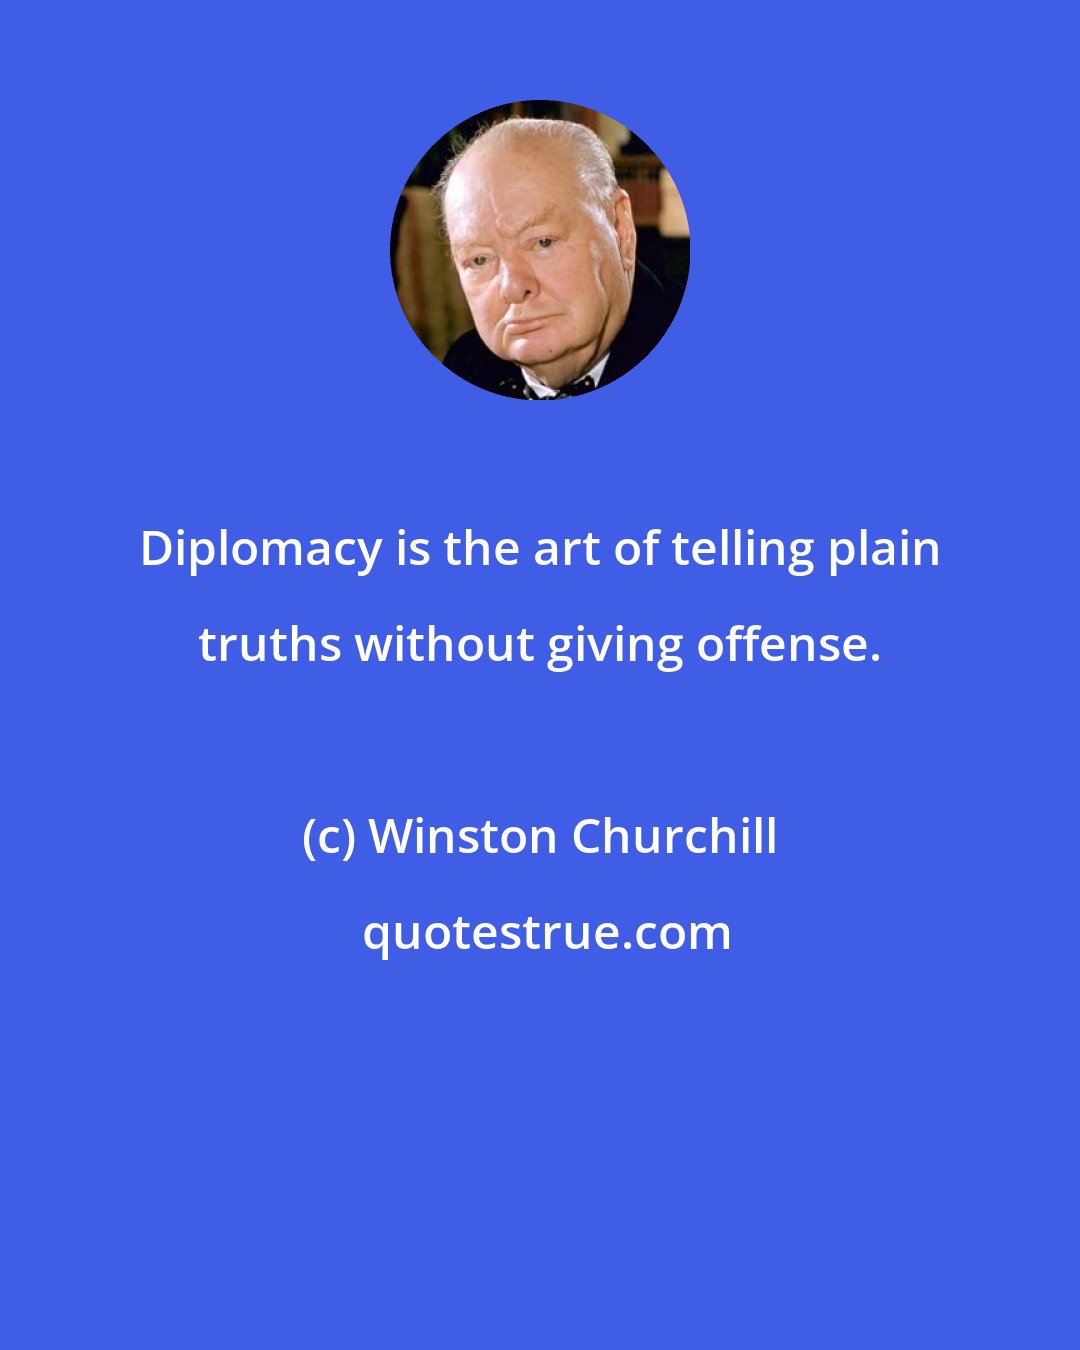 Winston Churchill: Diplomacy is the art of telling plain truths without giving offense.